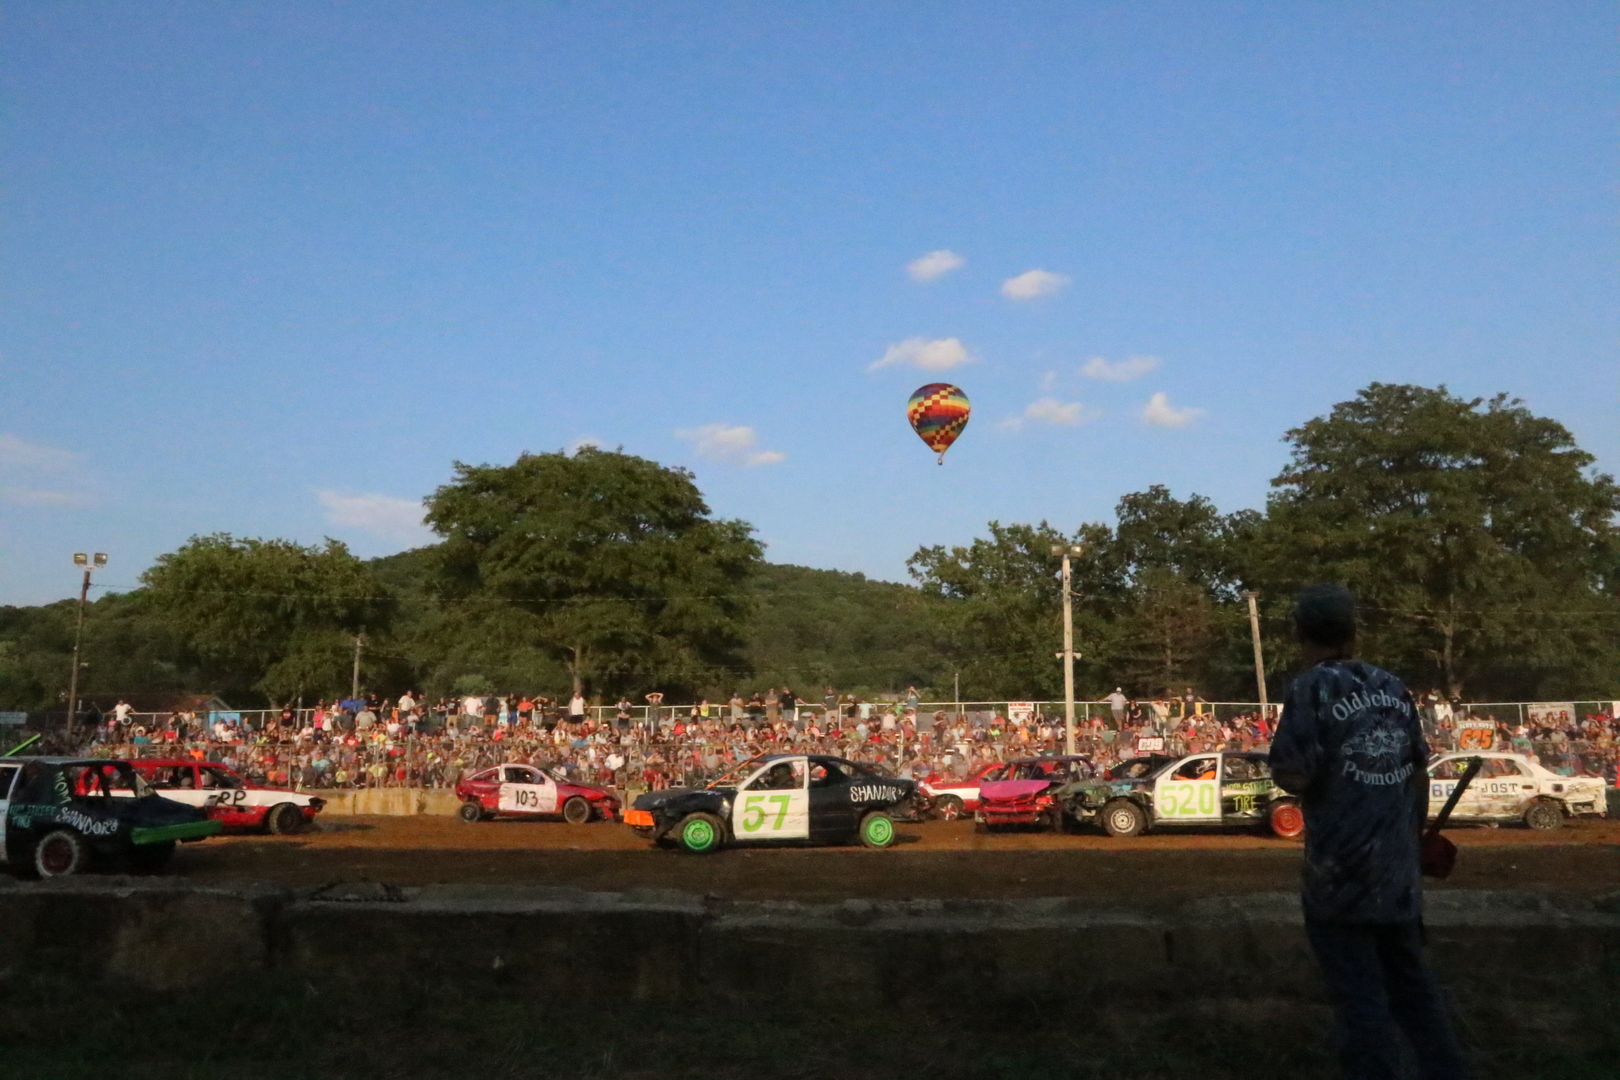 Warren County Farmers' Fair and Hot Air Balloon Festival, Phillipsburg, New Jersey, United States